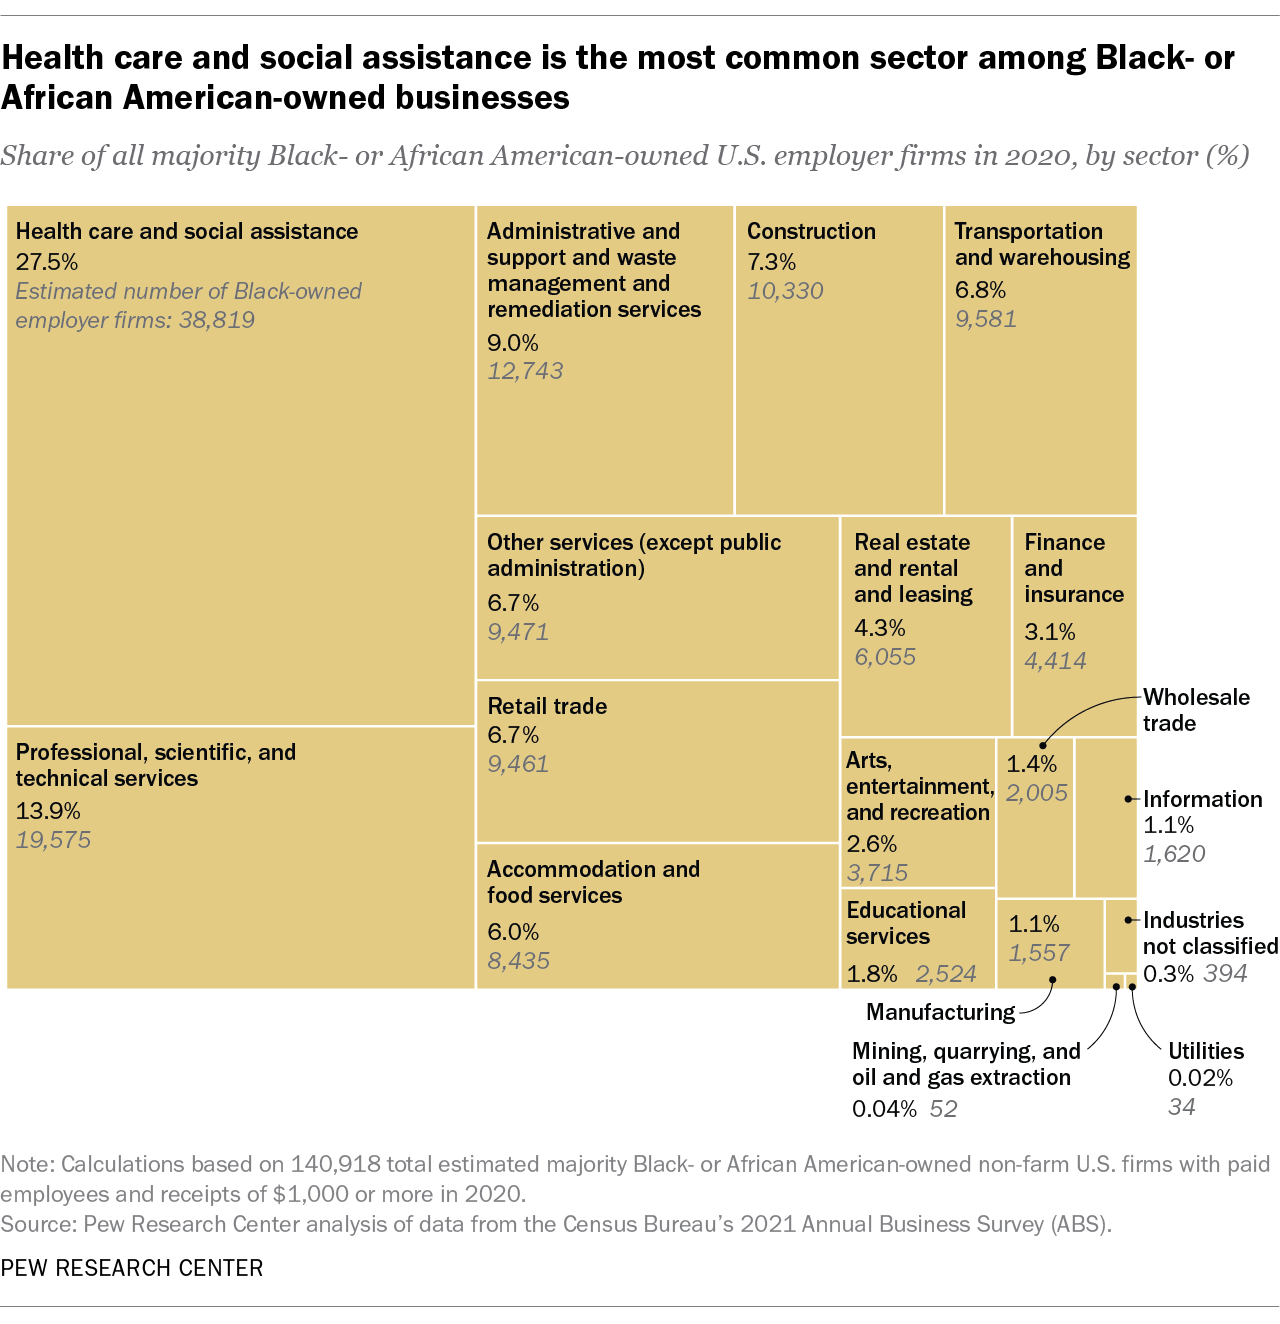 A chart showing that health care and social assistance is the most common sector among Black- or African American-owned businesses